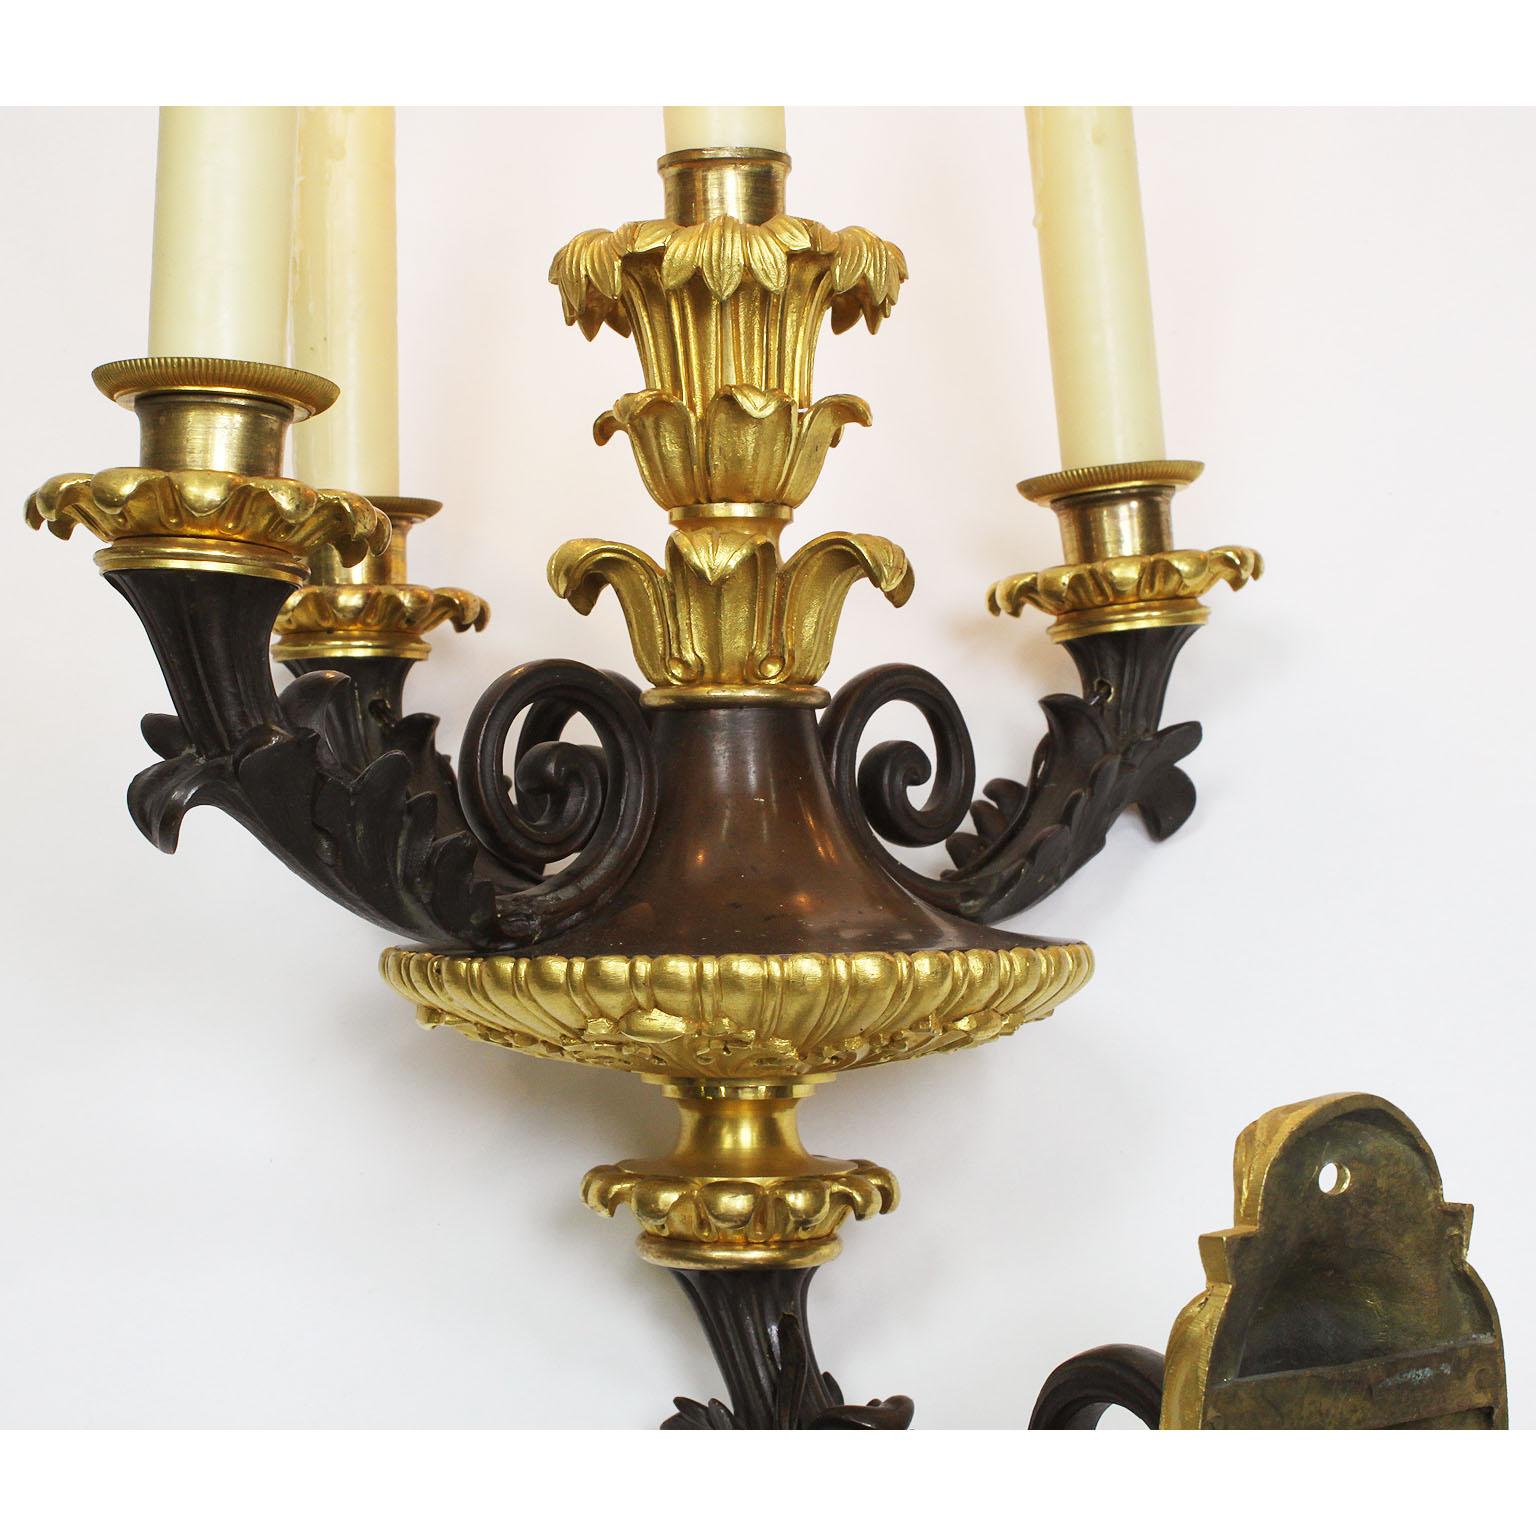 French 19th Century Neoclassical Empire Revival Style Bronze Wall Sconces, Pair In Good Condition For Sale In Los Angeles, CA